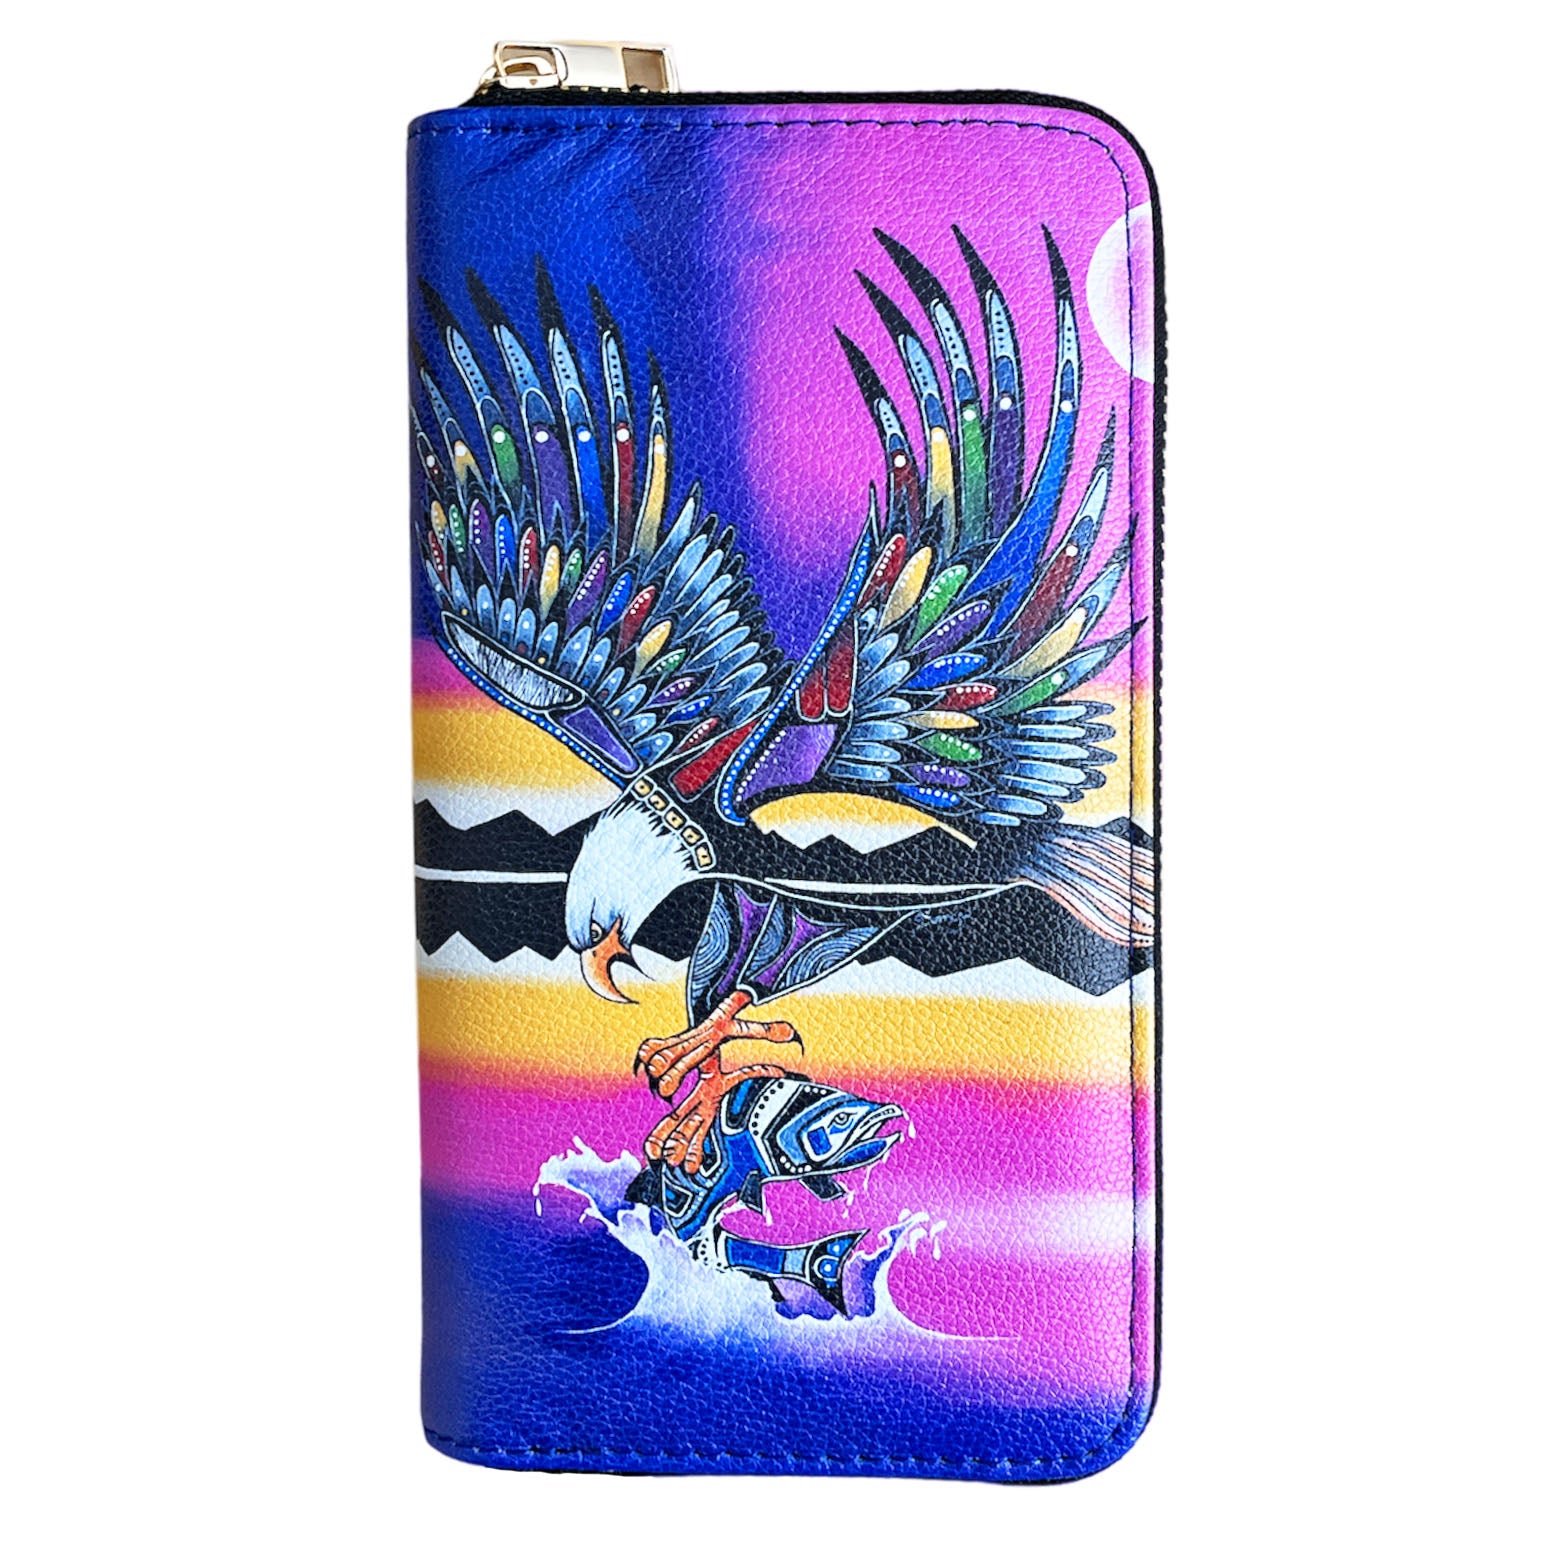 Jessica Somers Eagle Zip-Around Wallet - Out of Stock